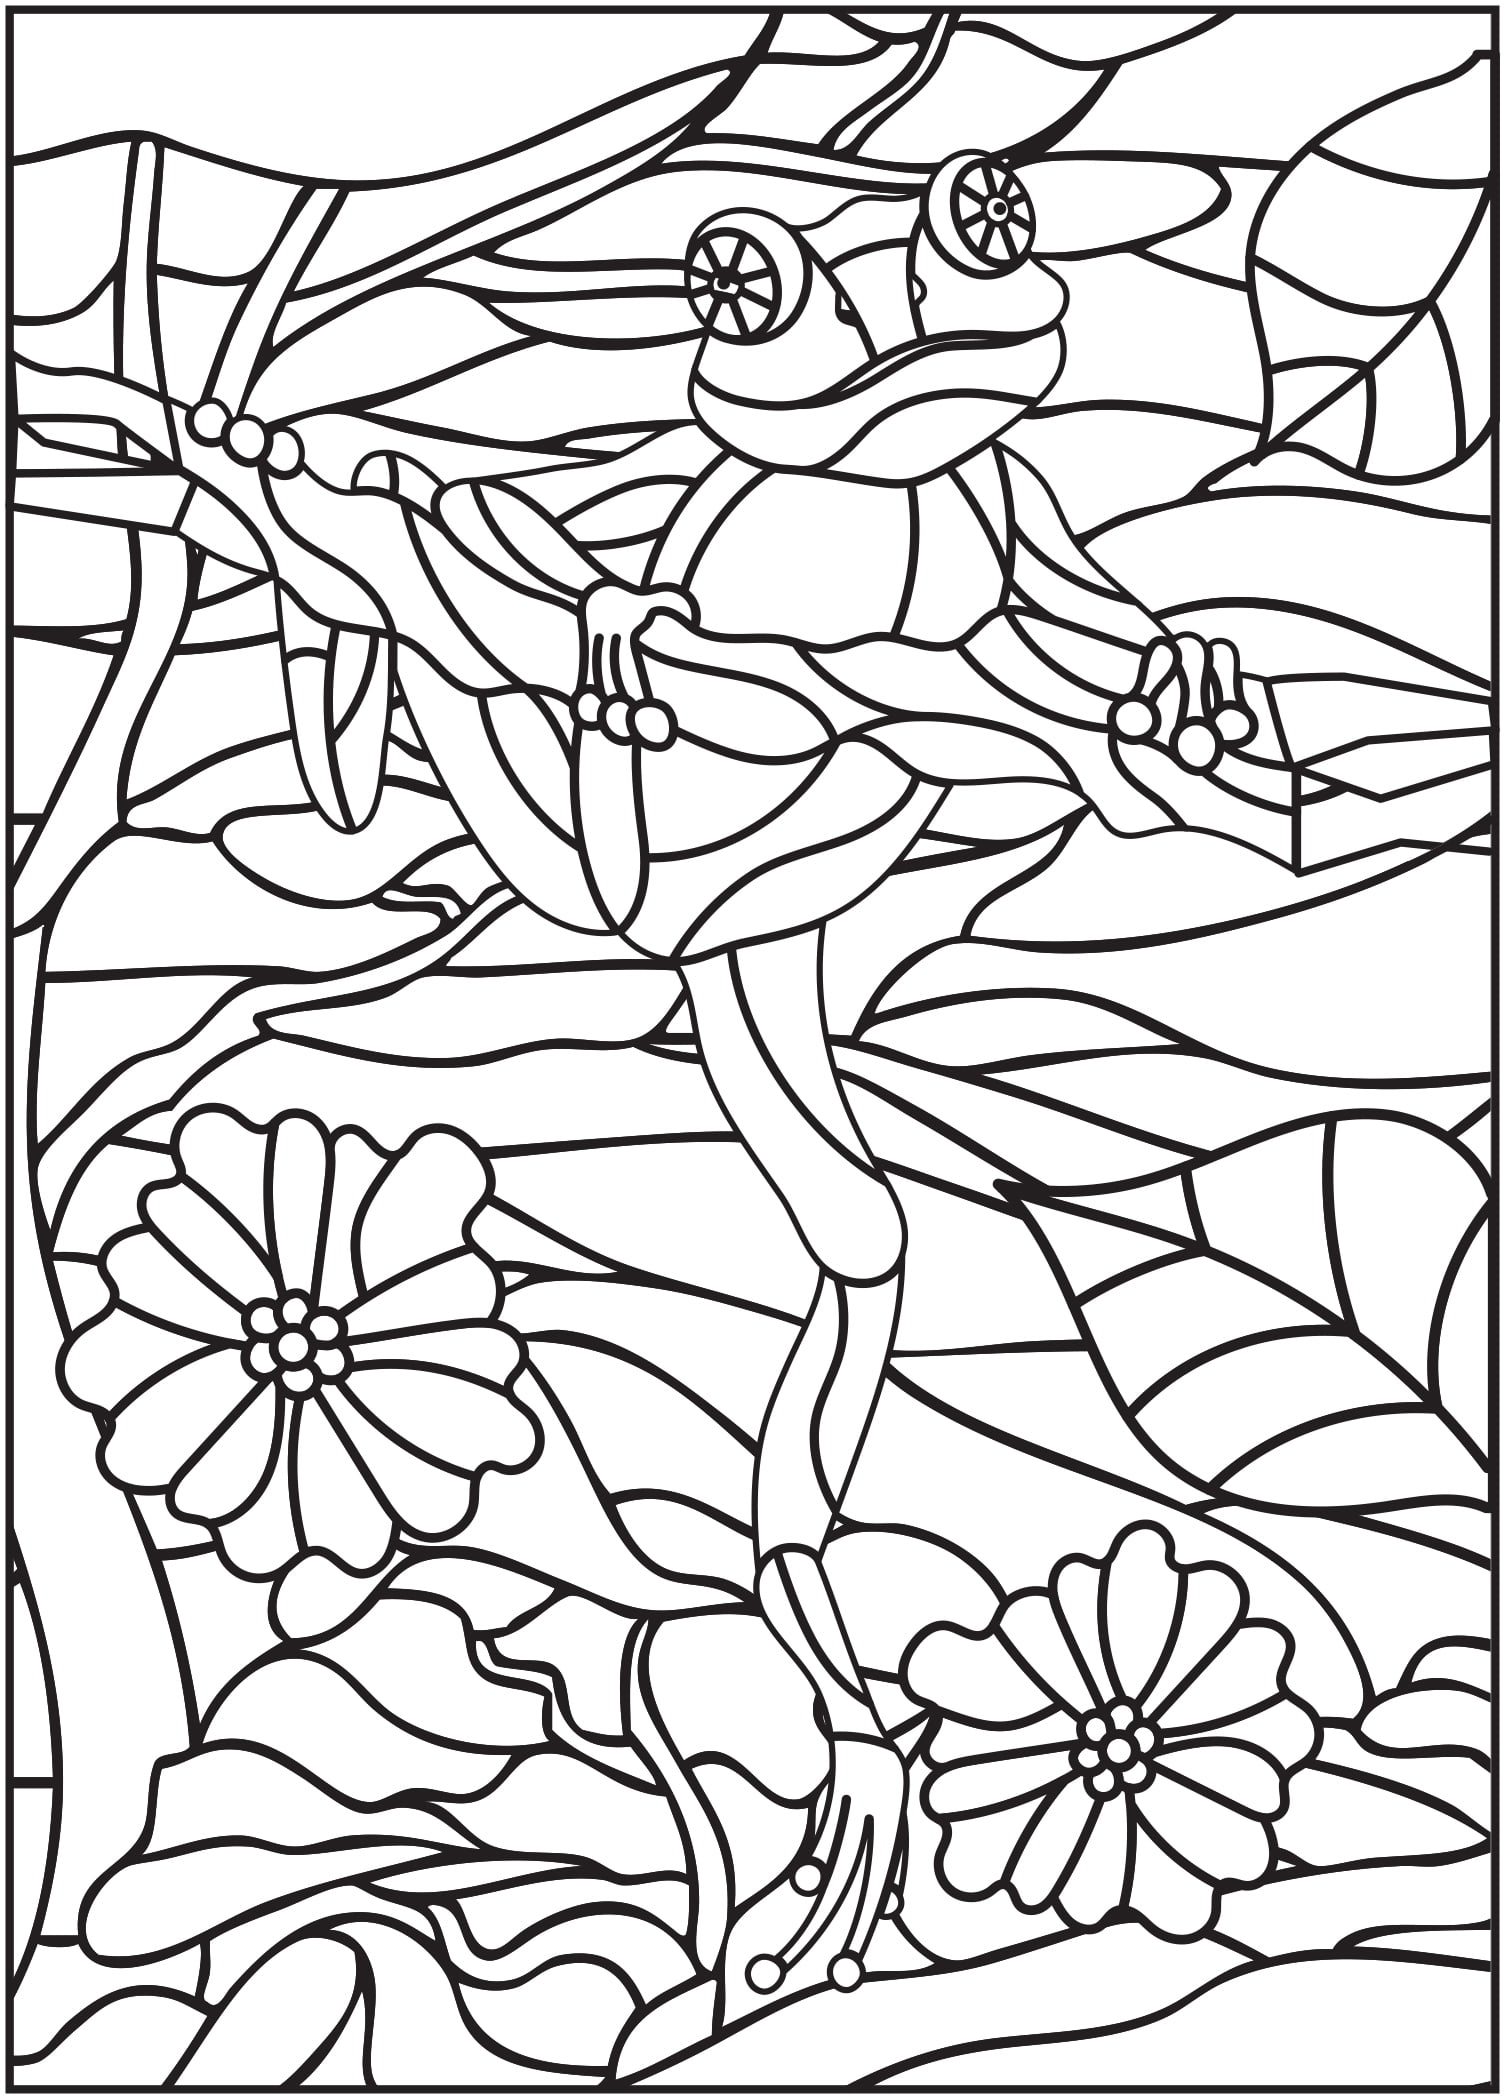 Cra Z Art Timeless Creations Coloring Book, Stained Glass, 20 ...